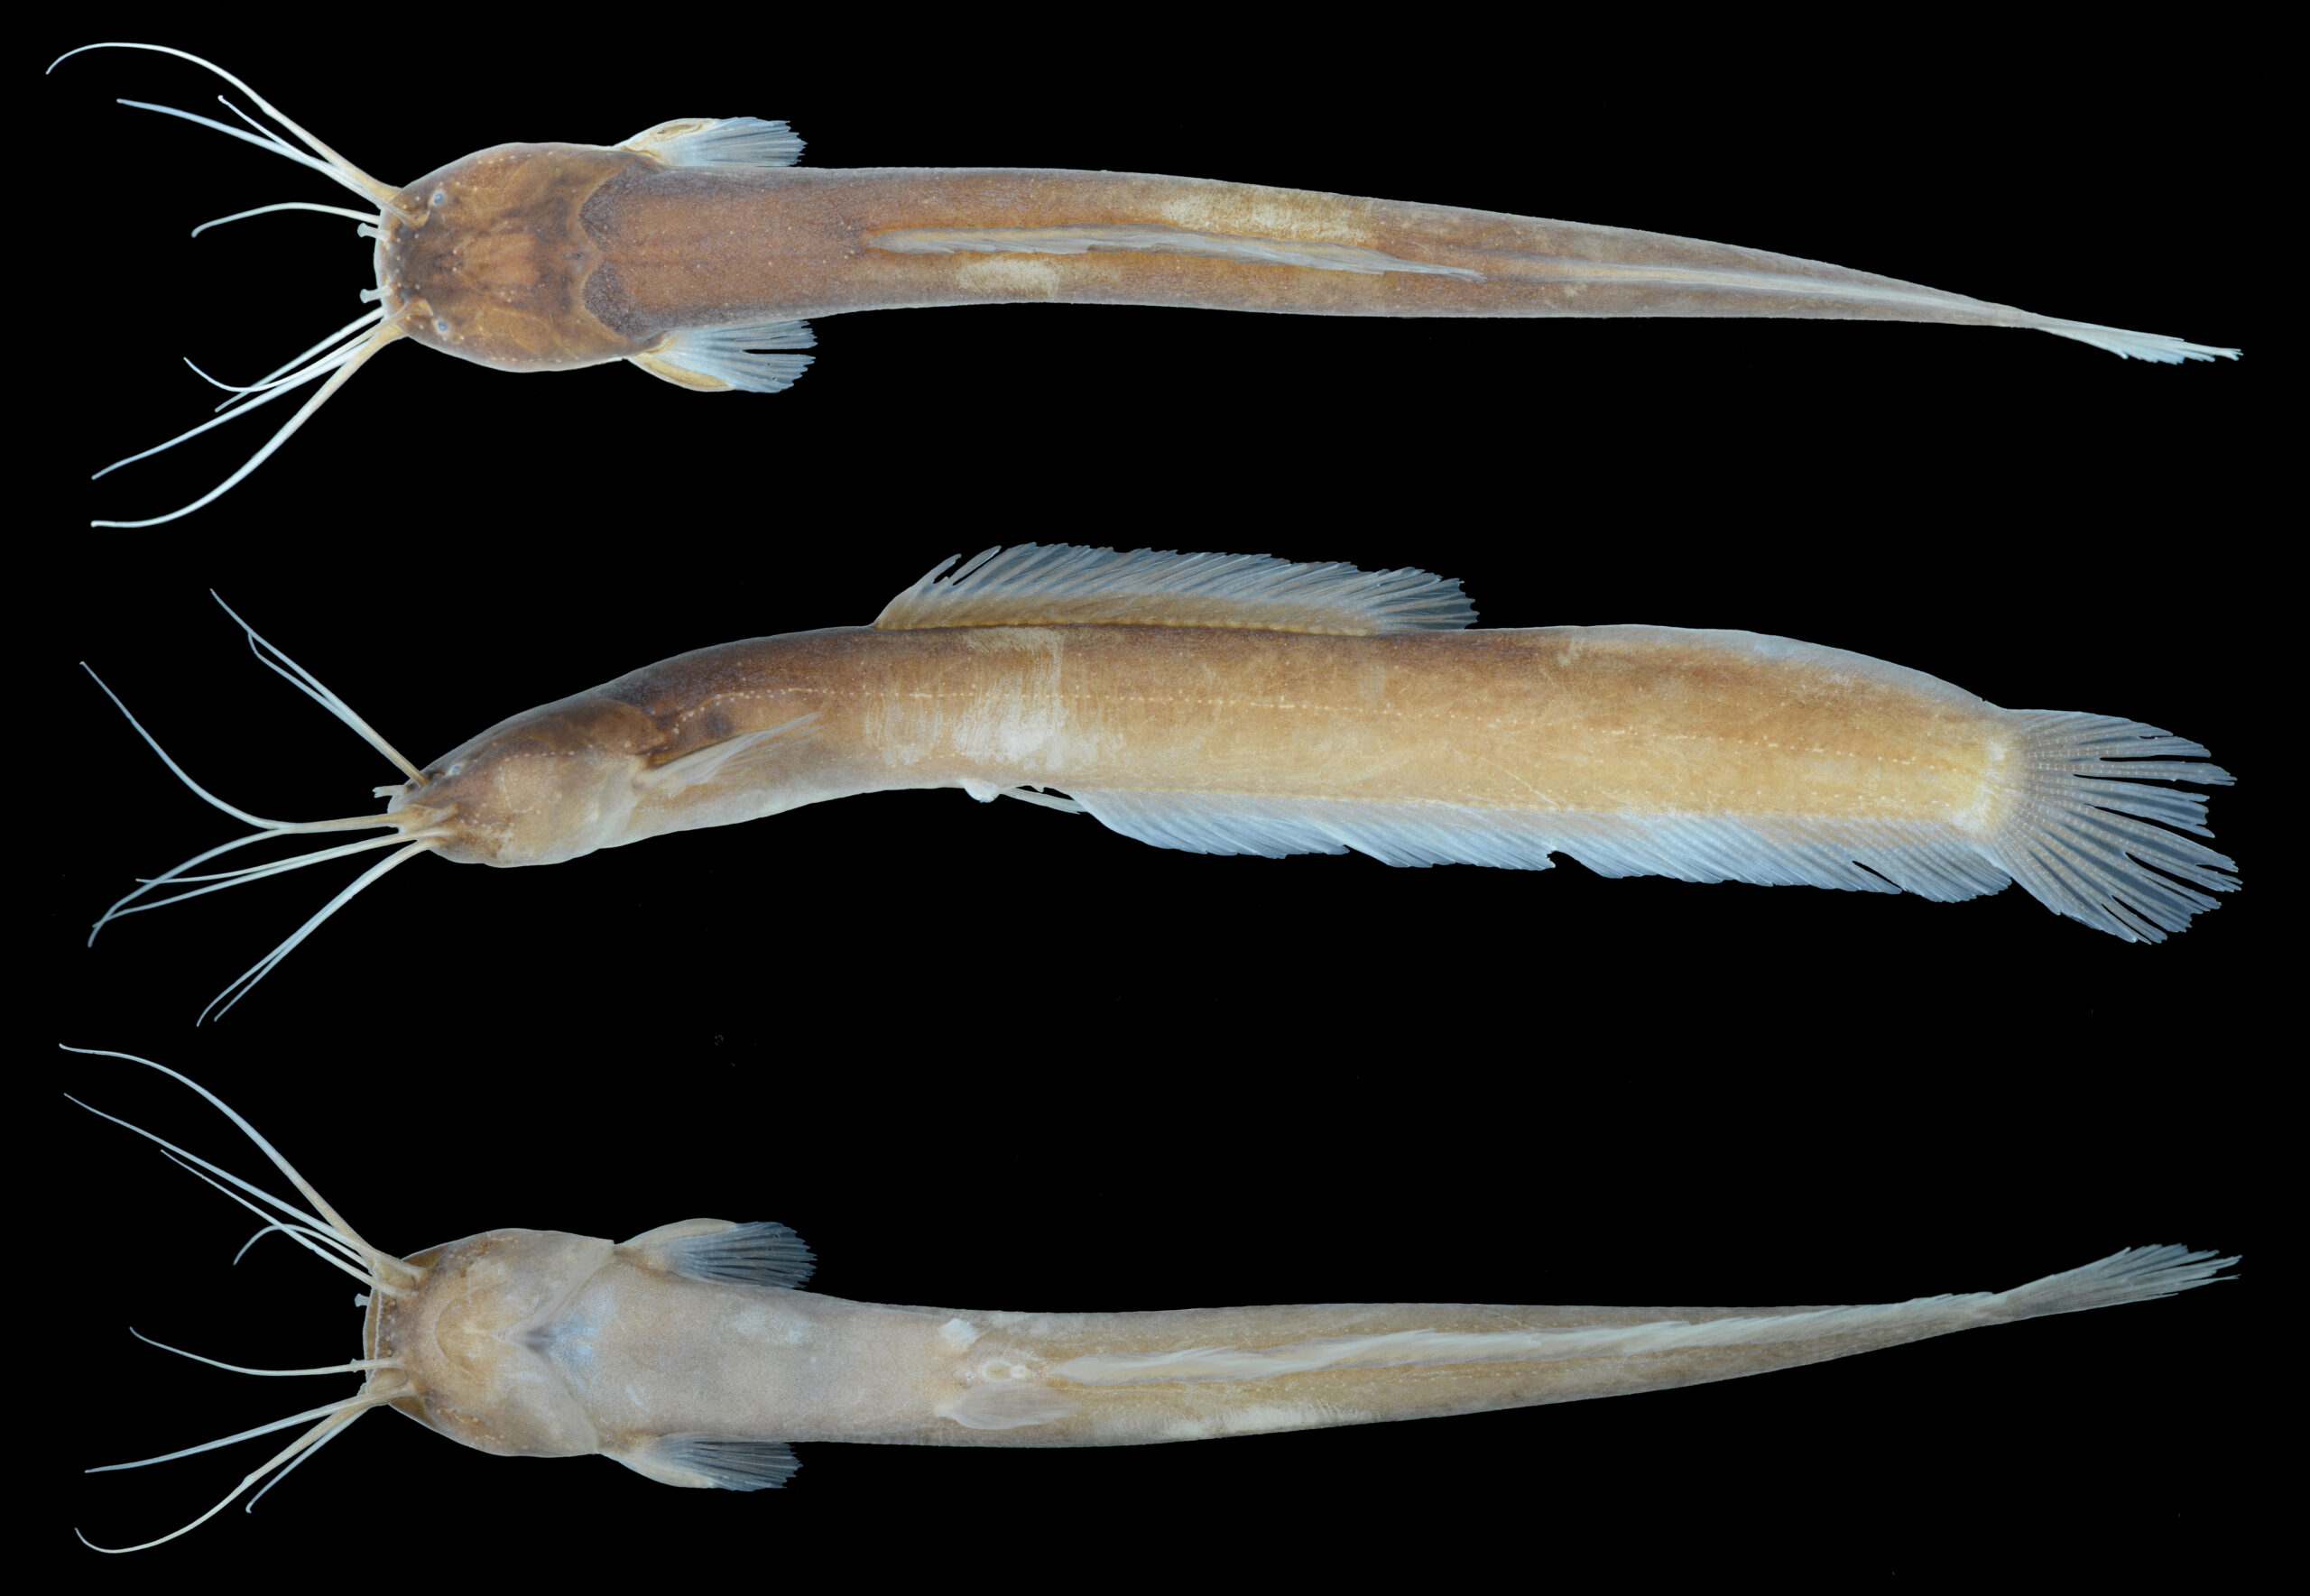 A photograph of the keli bladefin catfish specimen from three different sides, in a lab environment.